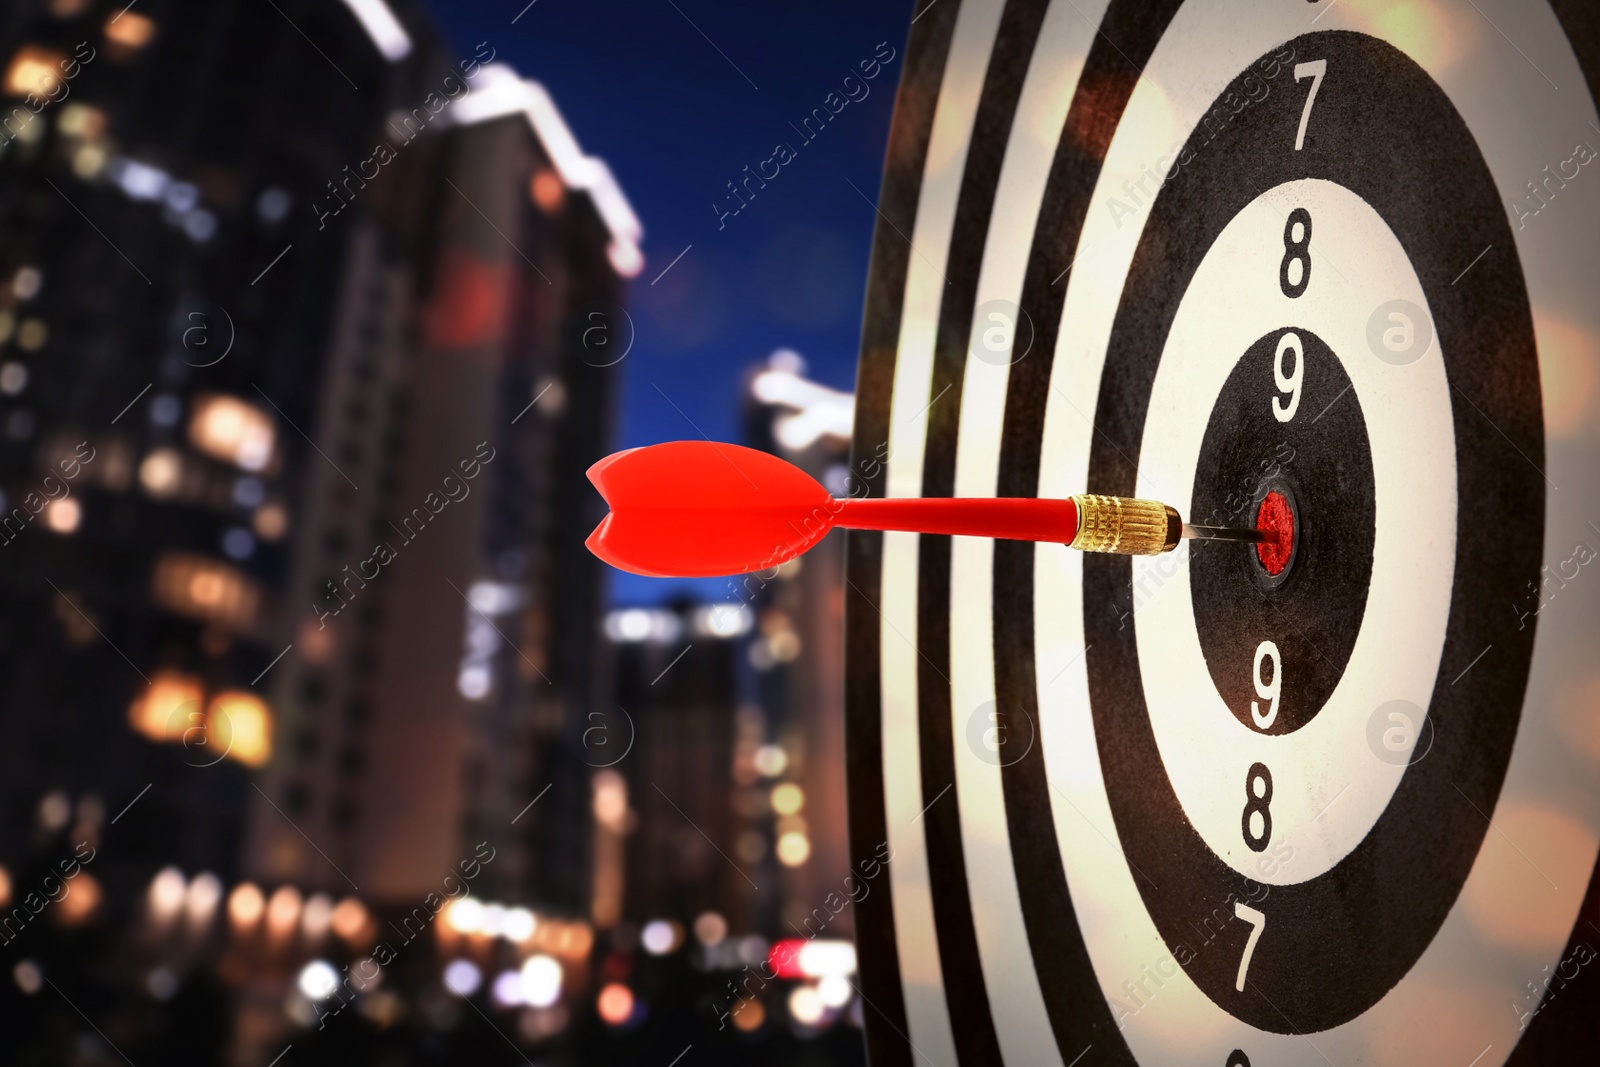 Image of Red dart hitting target on board against blurred of view night cityscape